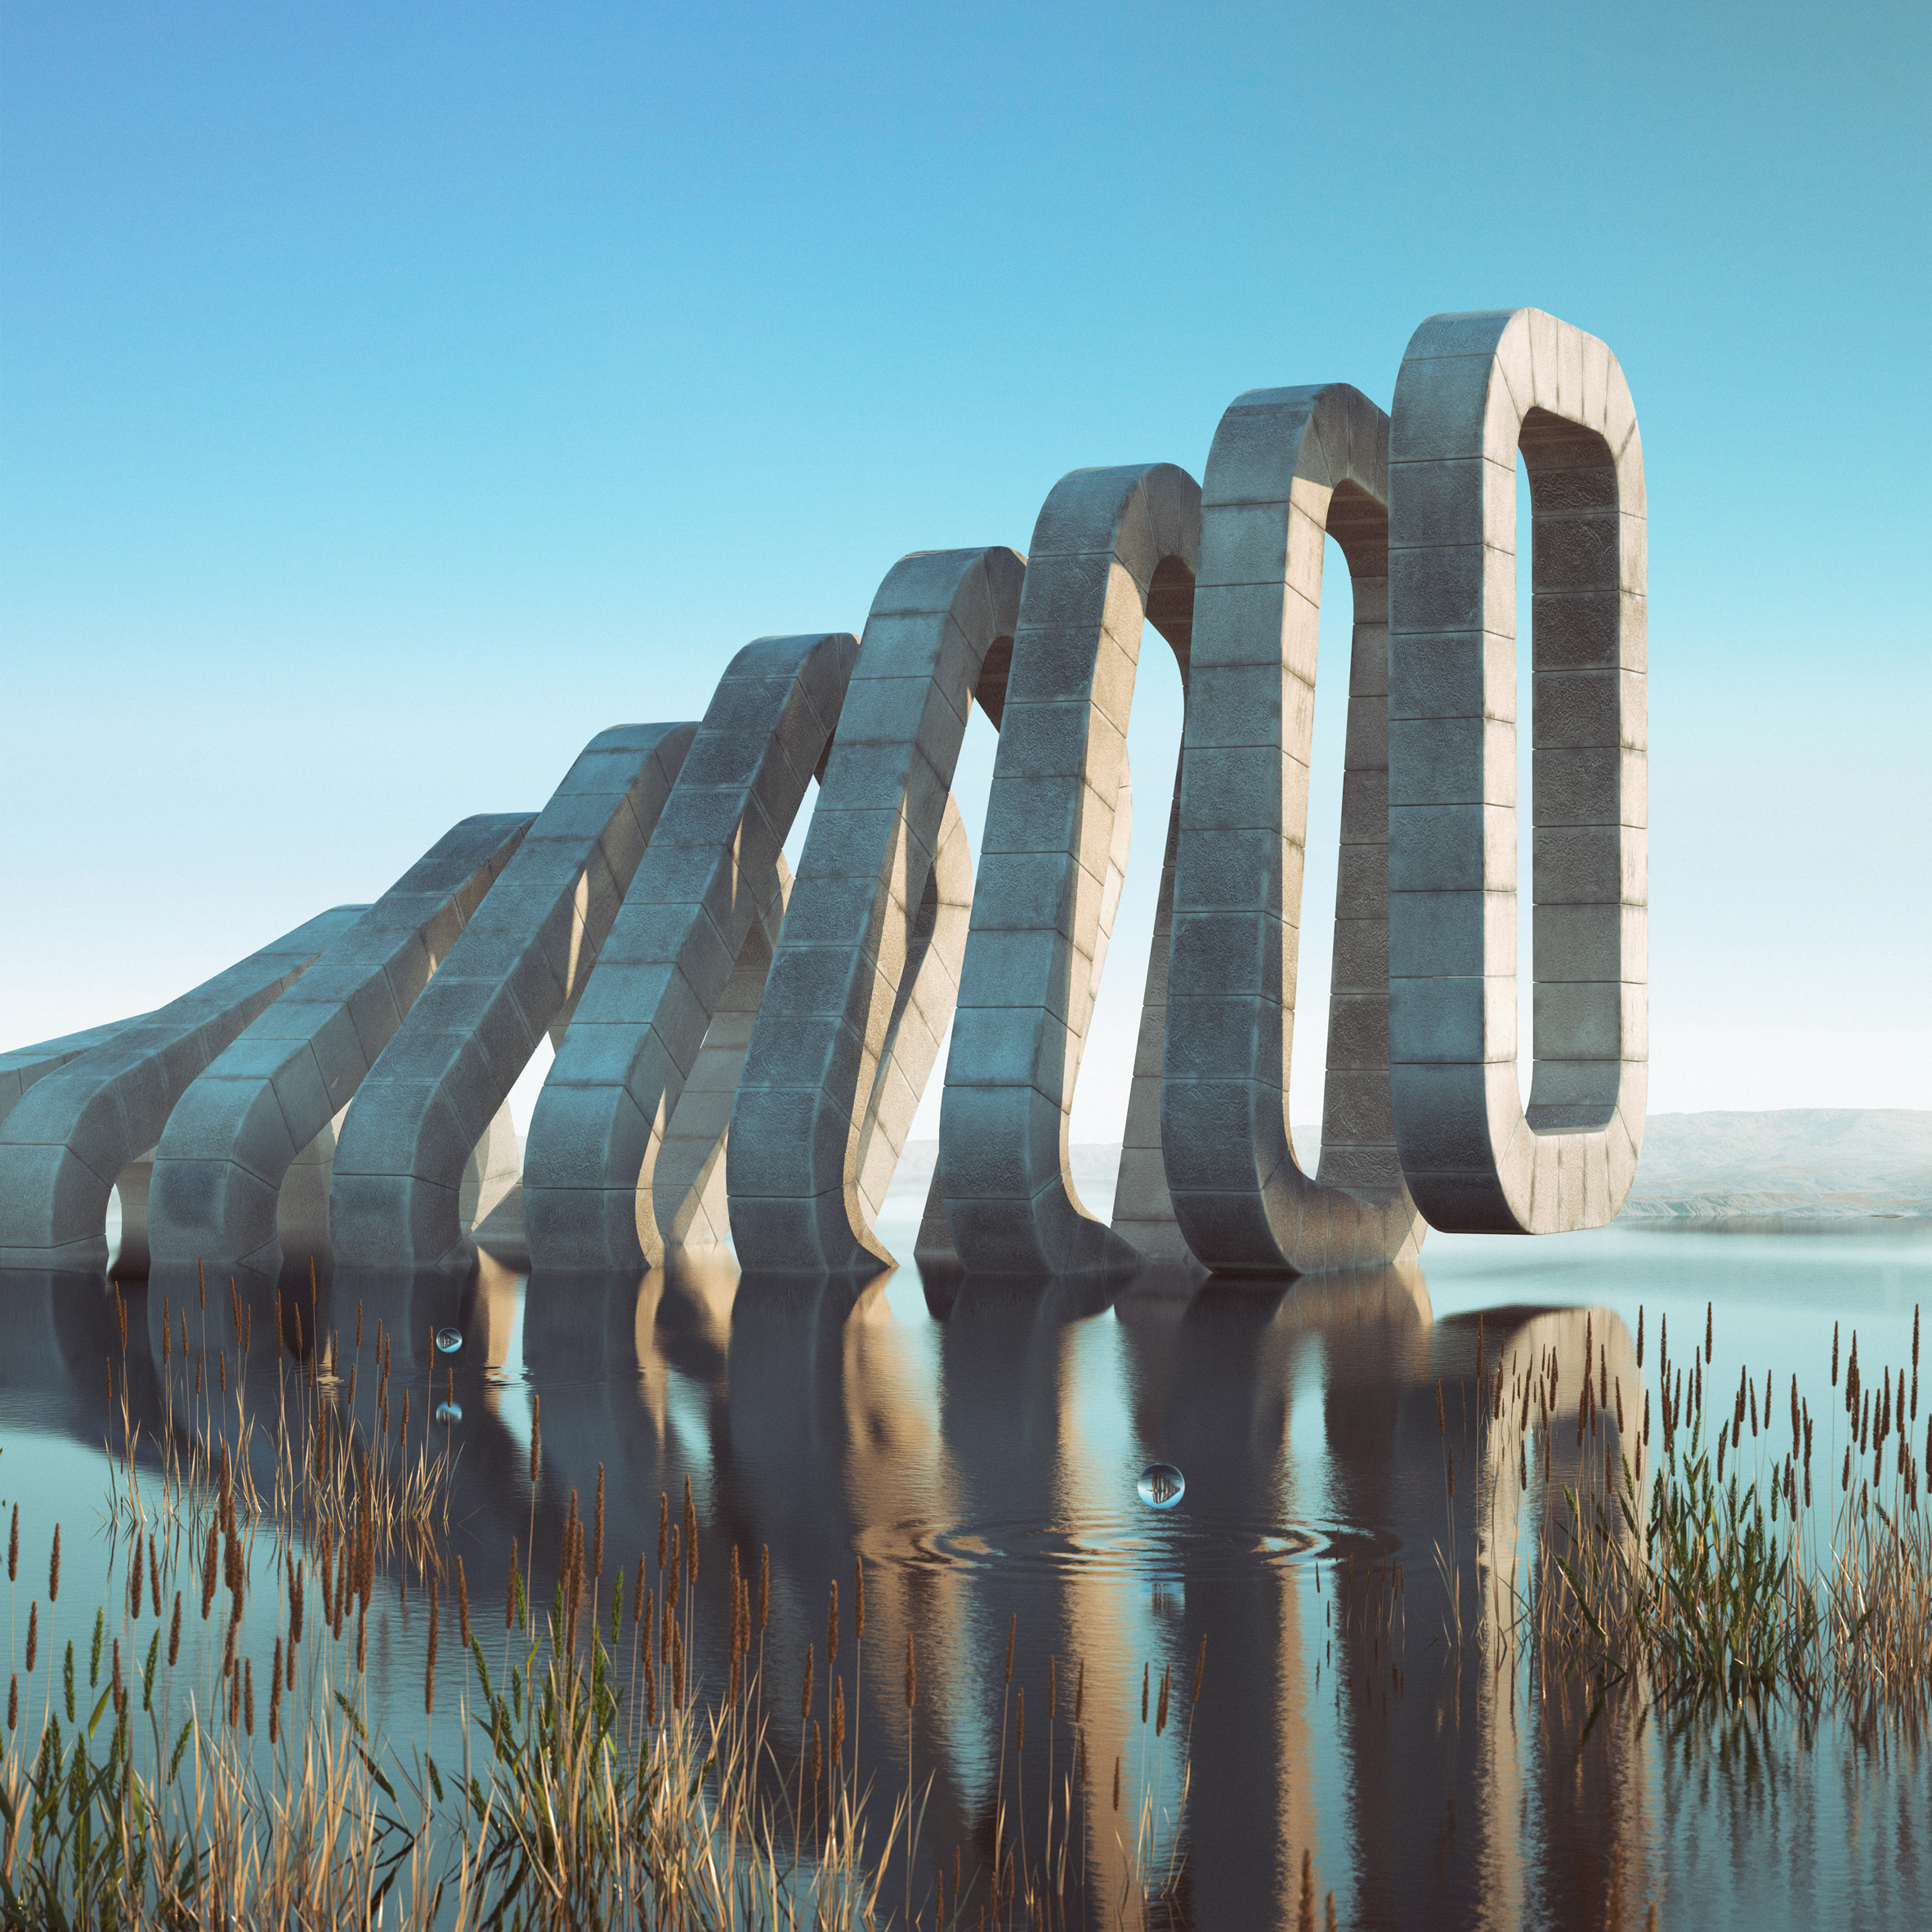 Filip Hodas features in the Dreamscapes & Artificial Architecture book published by Gestalten